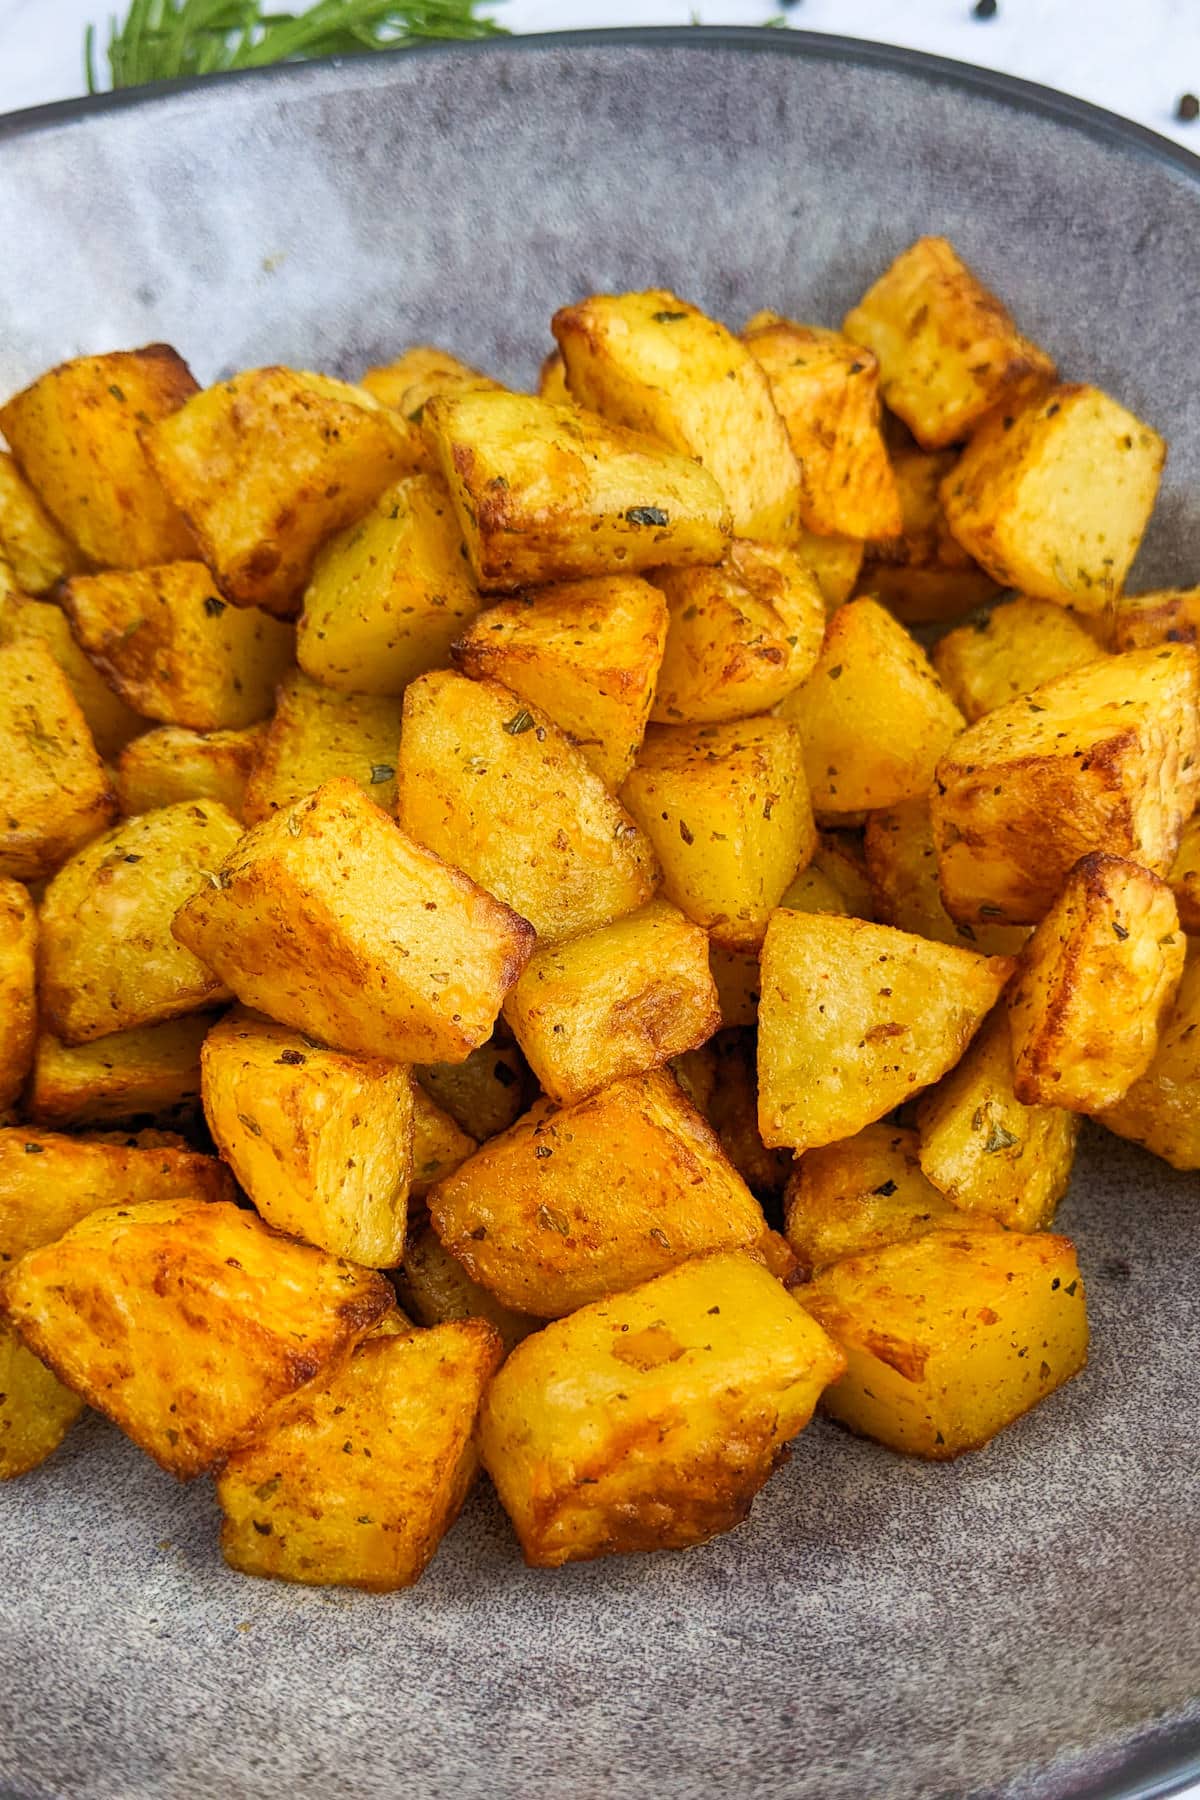 A plate with diced paprika potatoes roasted in air fryer.